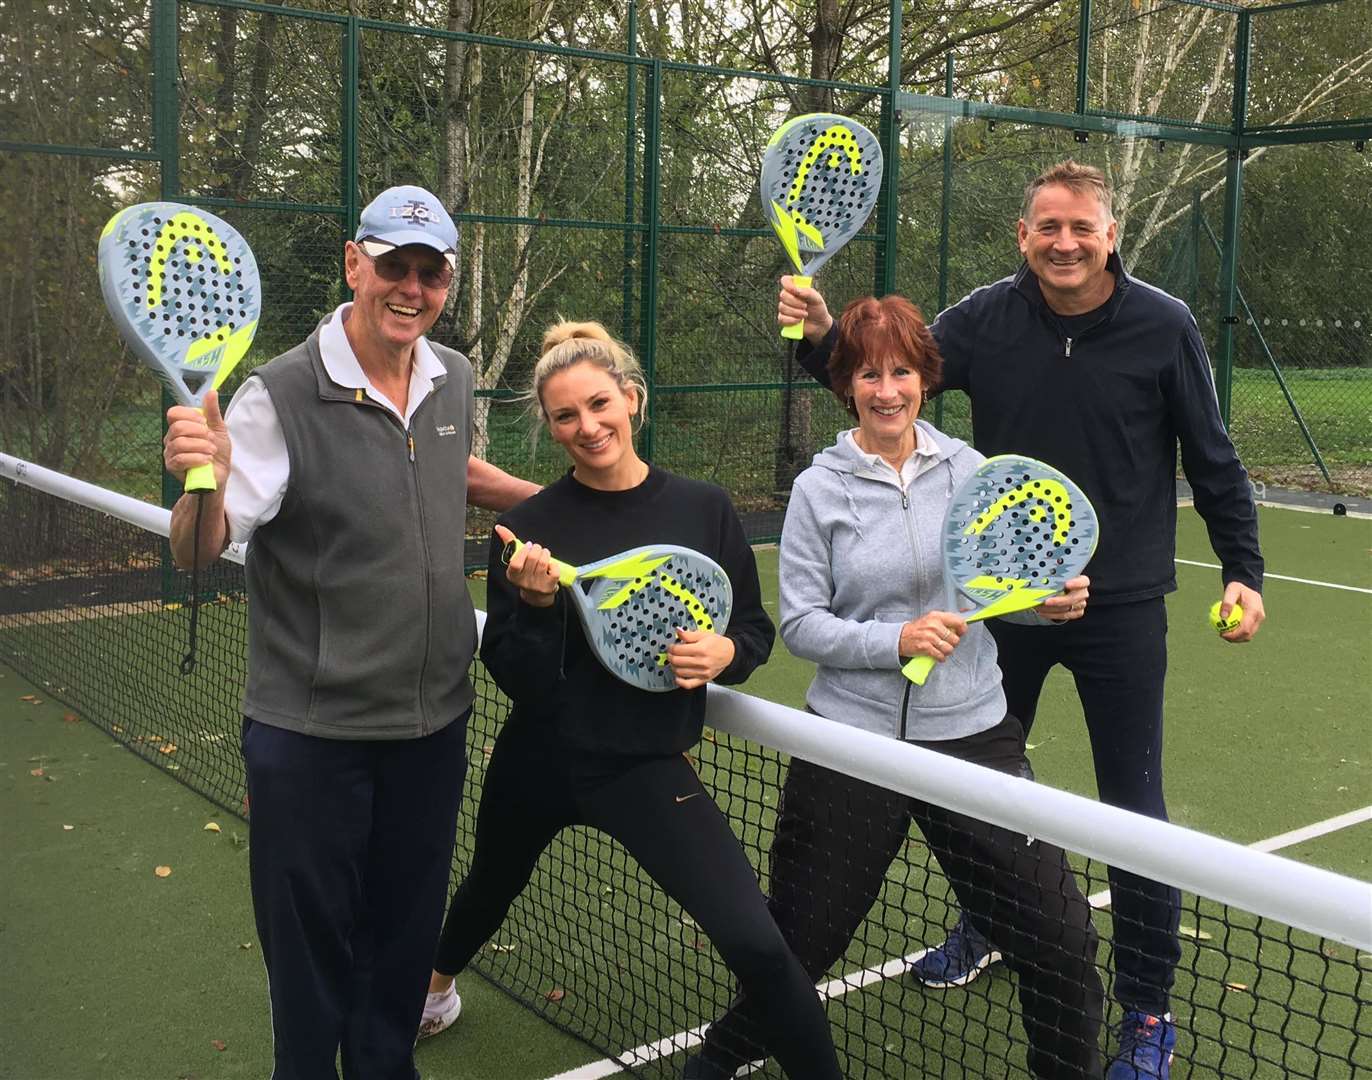 Wye Tennis Club's Graham Sutherland, Lucy Mohr, Beryl Sutherland and John Shaw try out padel tennis